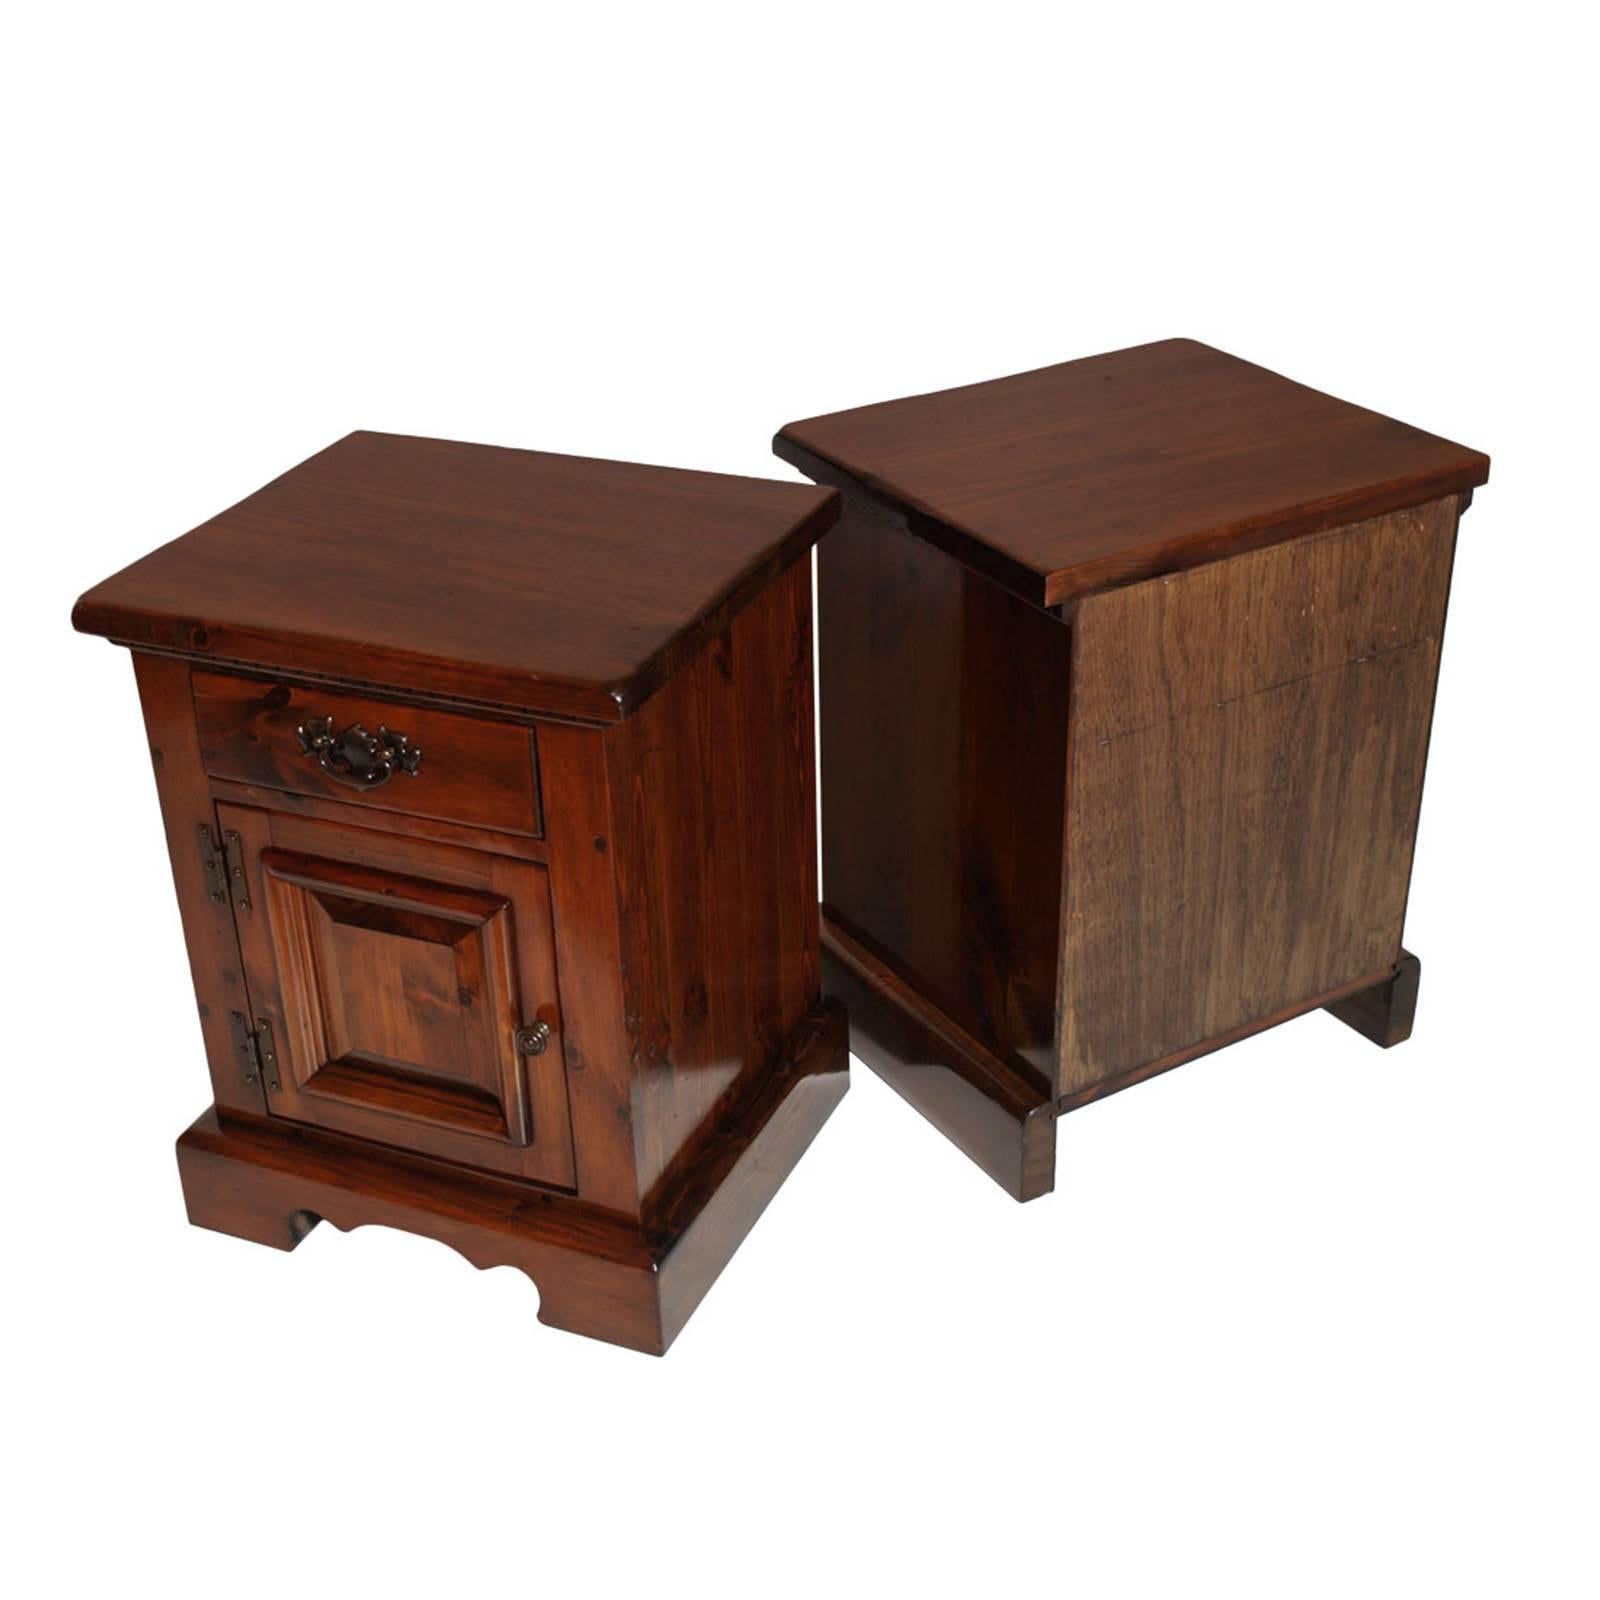 Midcentury Massive Tuscany renaissance nightstands in solid pine , wax polished, by Bonciani, Cascina , Tuscany, Italy
Measure cm: H 65, W 50, D 45.

About Bonciani
The Bonciani firm, important and famous furniture maker, was born on the initiative